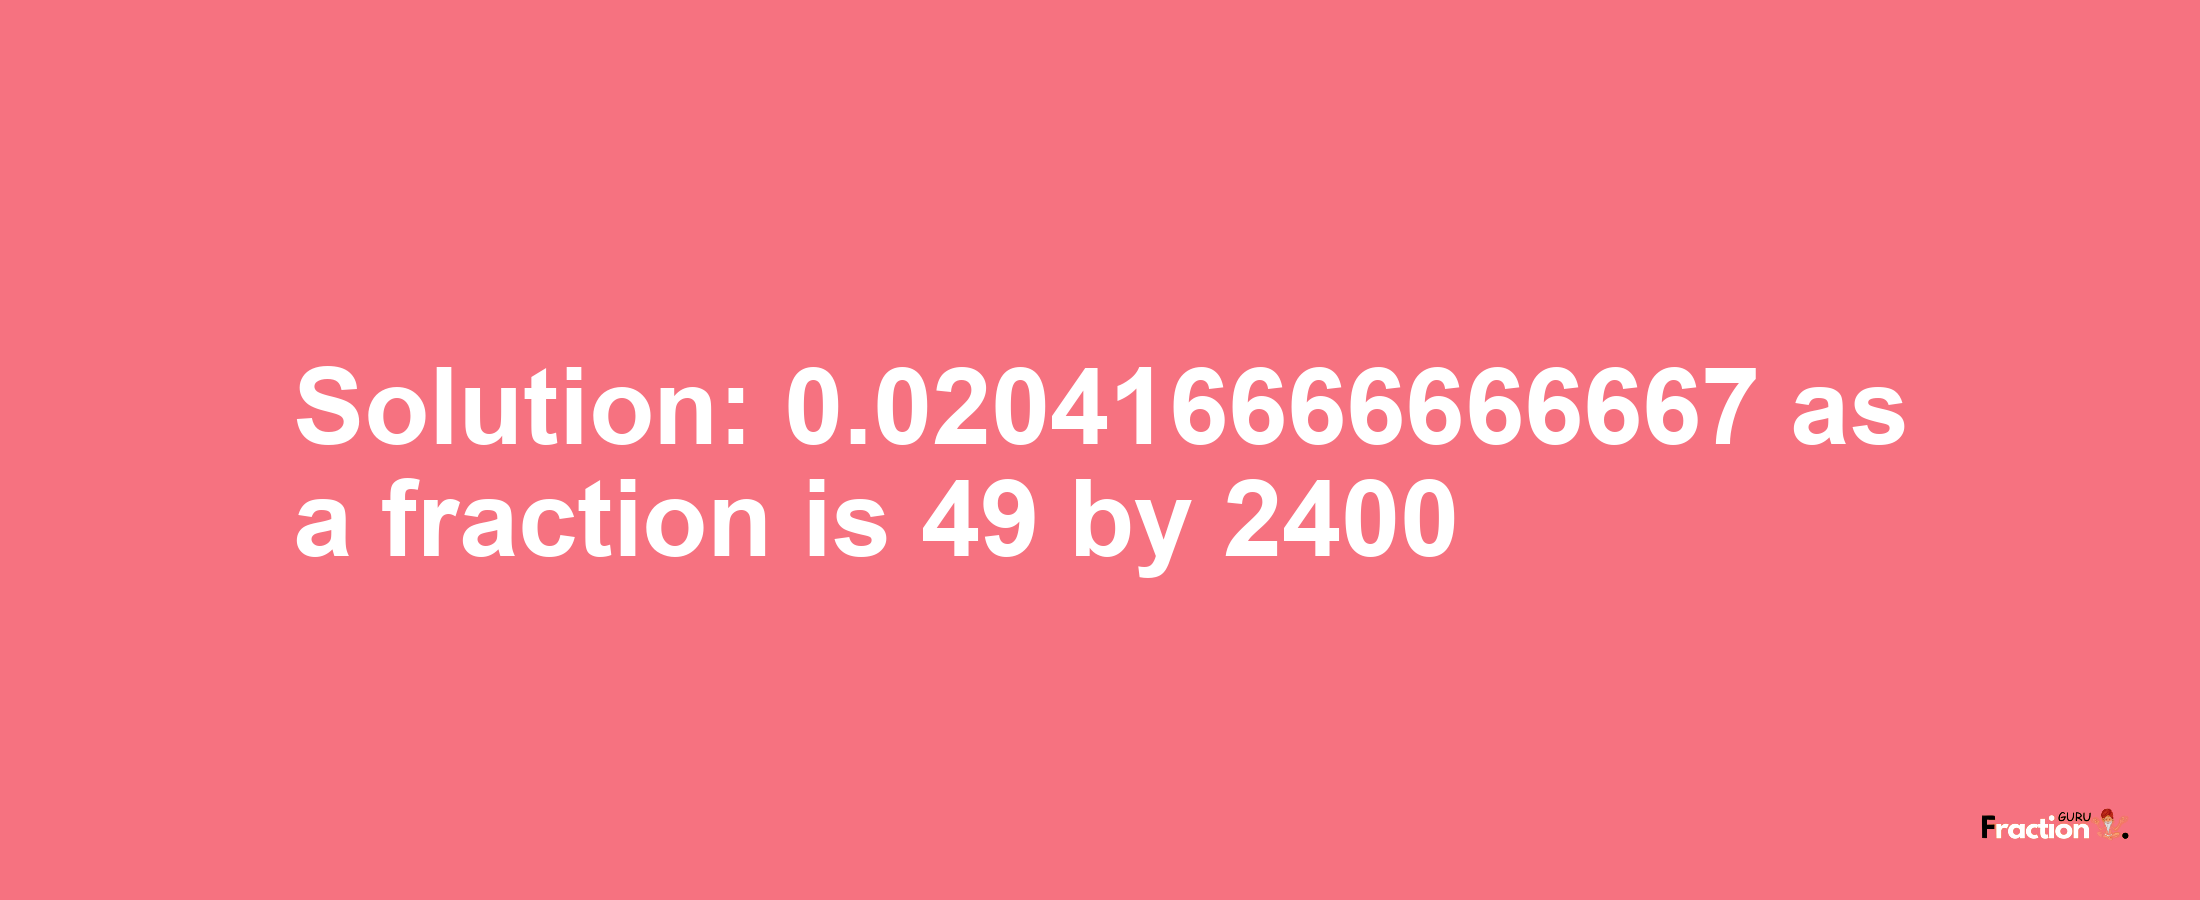 Solution:0.020416666666667 as a fraction is 49/2400